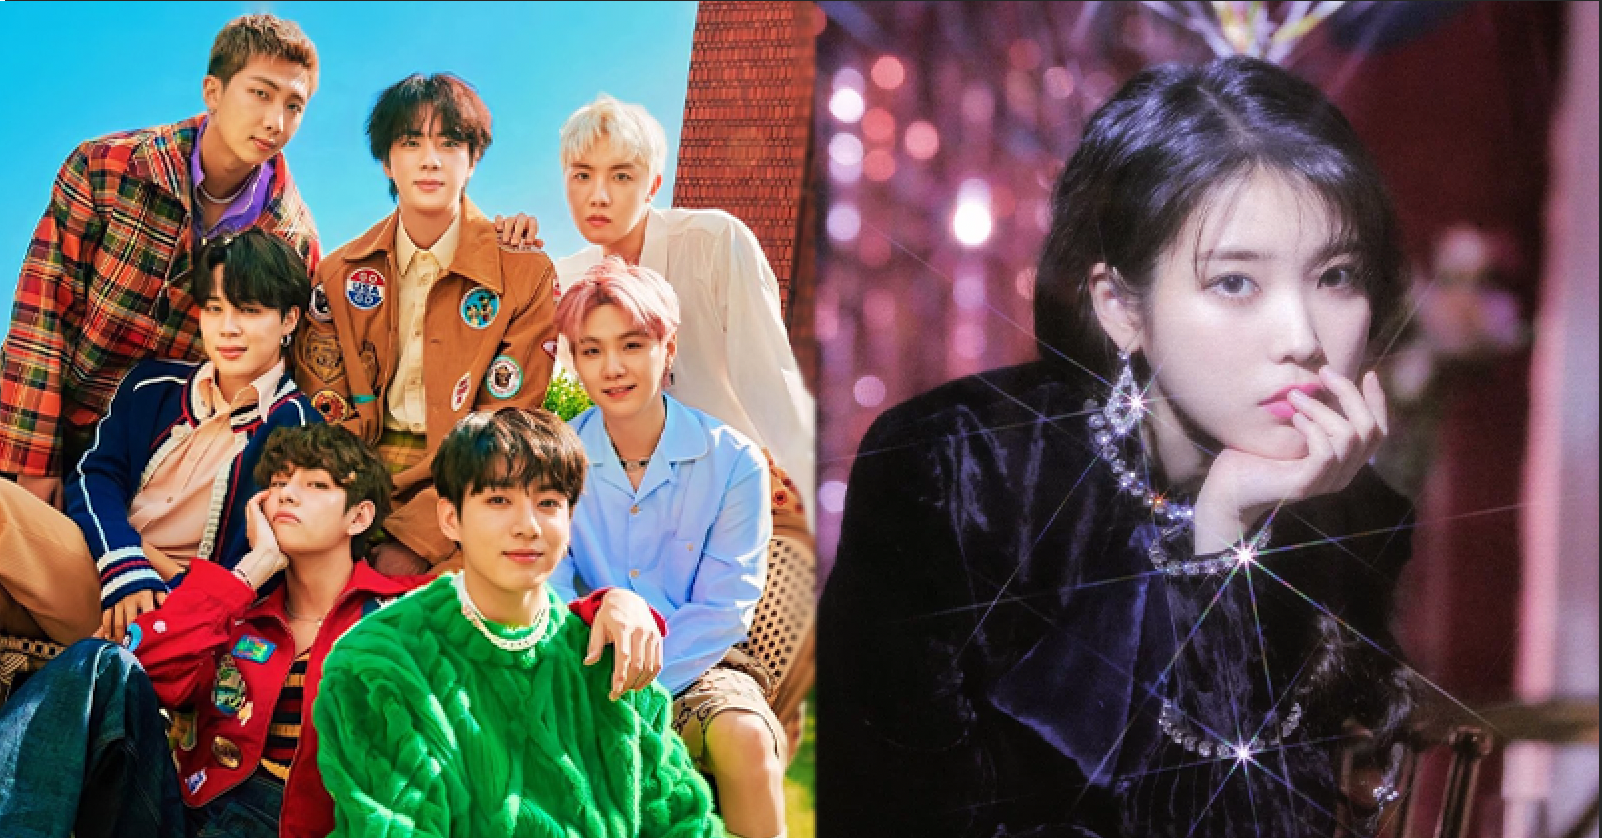 Top K-Pop Artists of 2021 According to Industry Experts